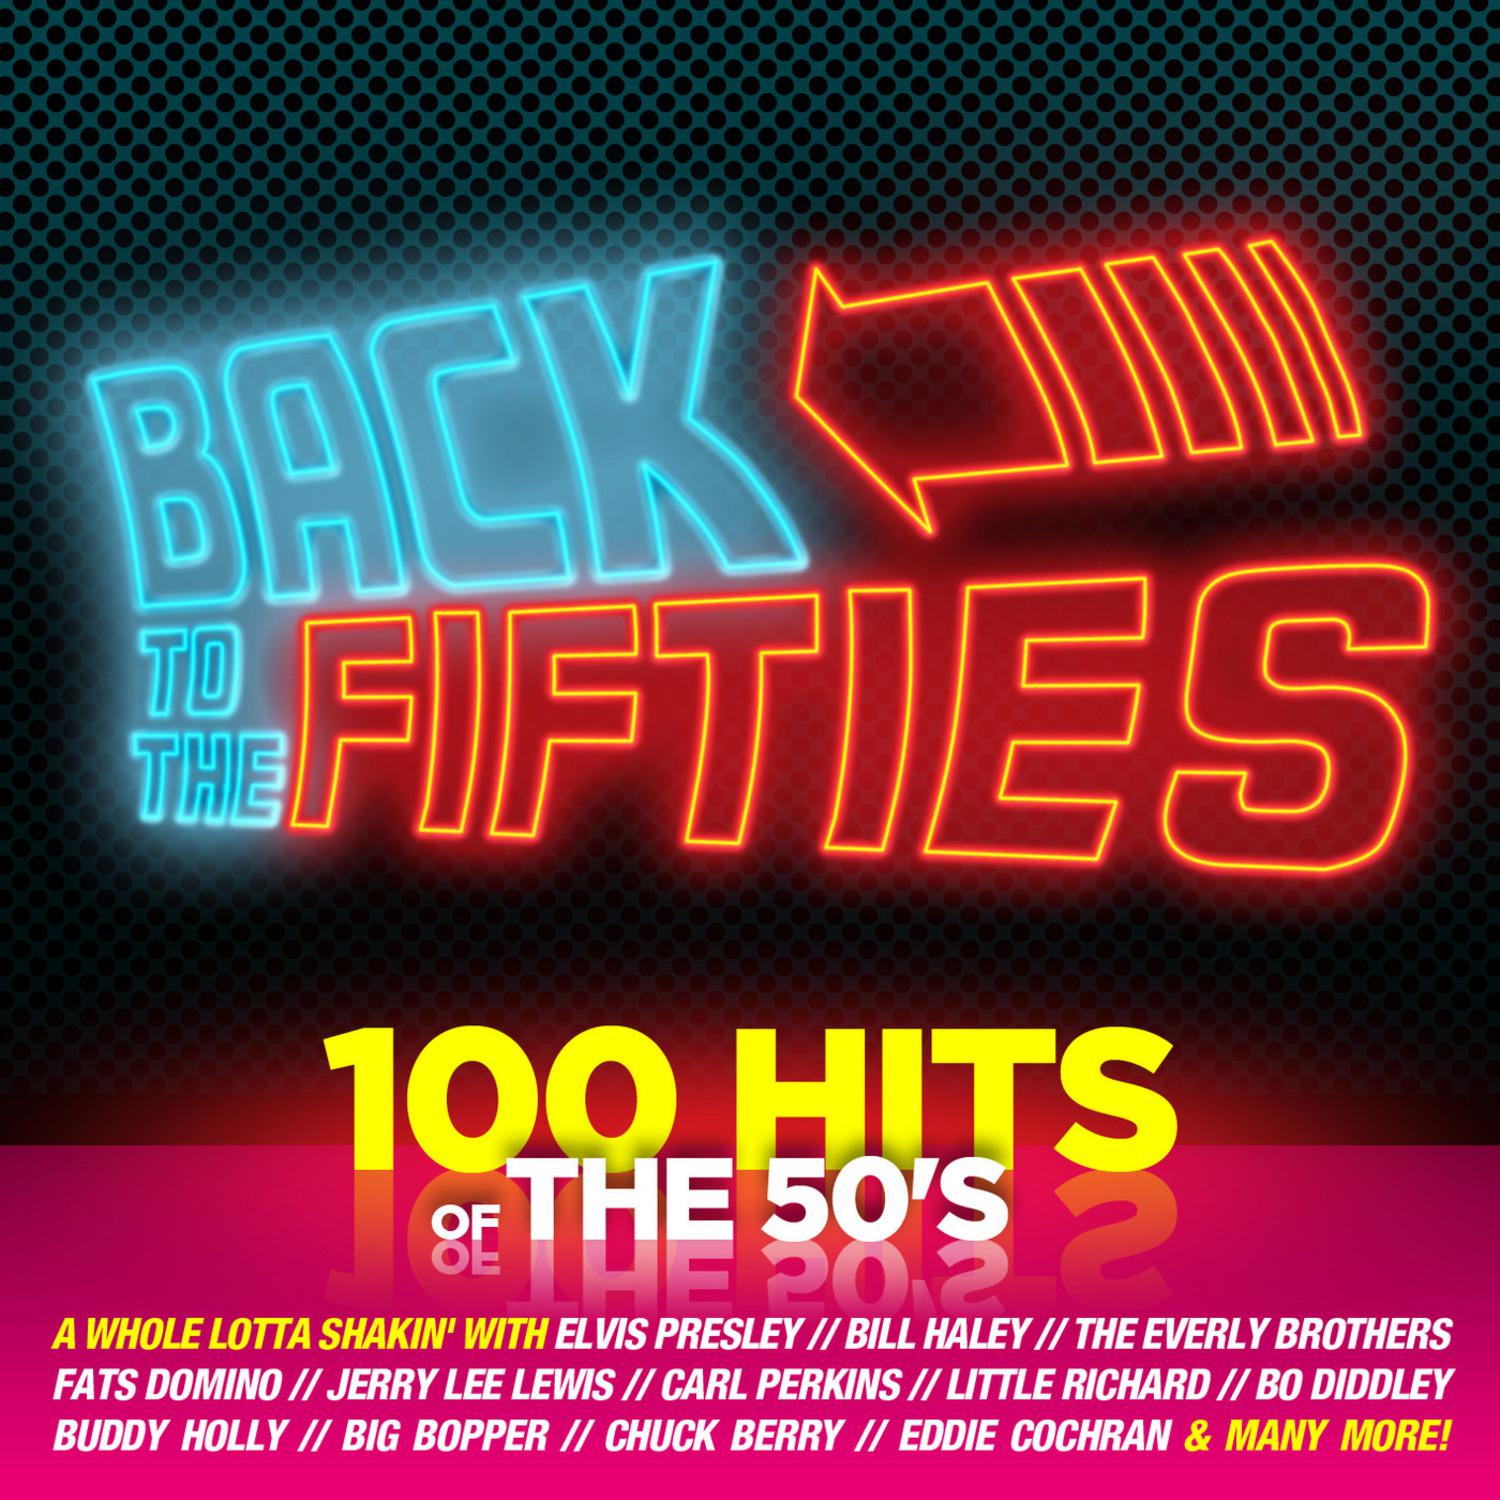 Back To the Fifties - 100 Hits From the 50's